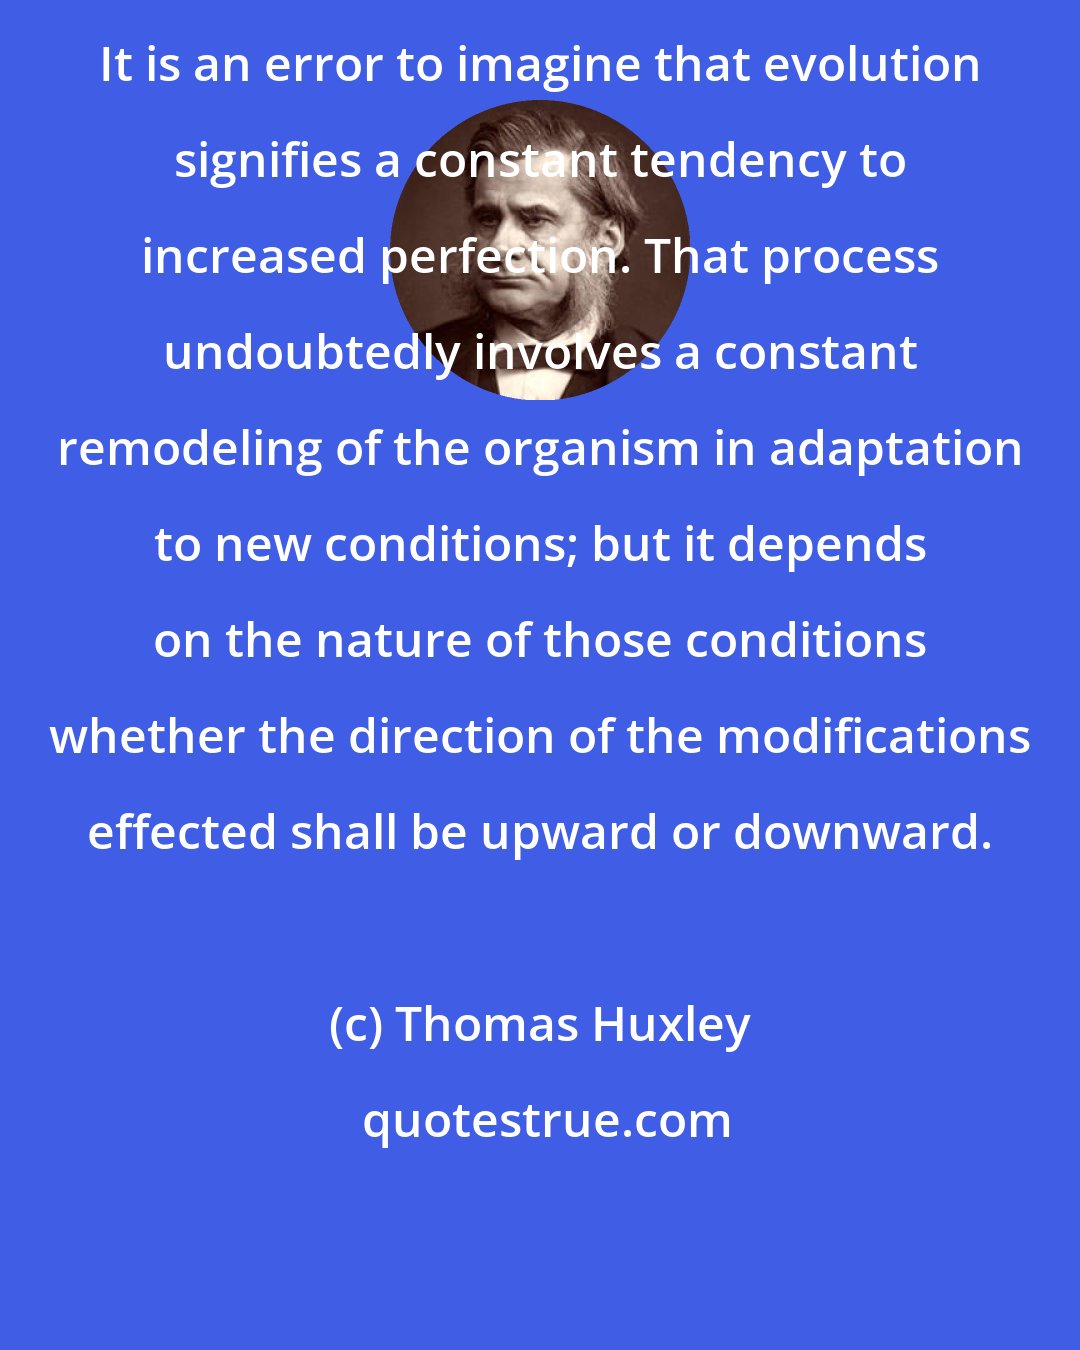 Thomas Huxley: It is an error to imagine that evolution signifies a constant tendency to increased perfection. That process undoubtedly involves a constant remodeling of the organism in adaptation to new conditions; but it depends on the nature of those conditions whether the direction of the modifications effected shall be upward or downward.